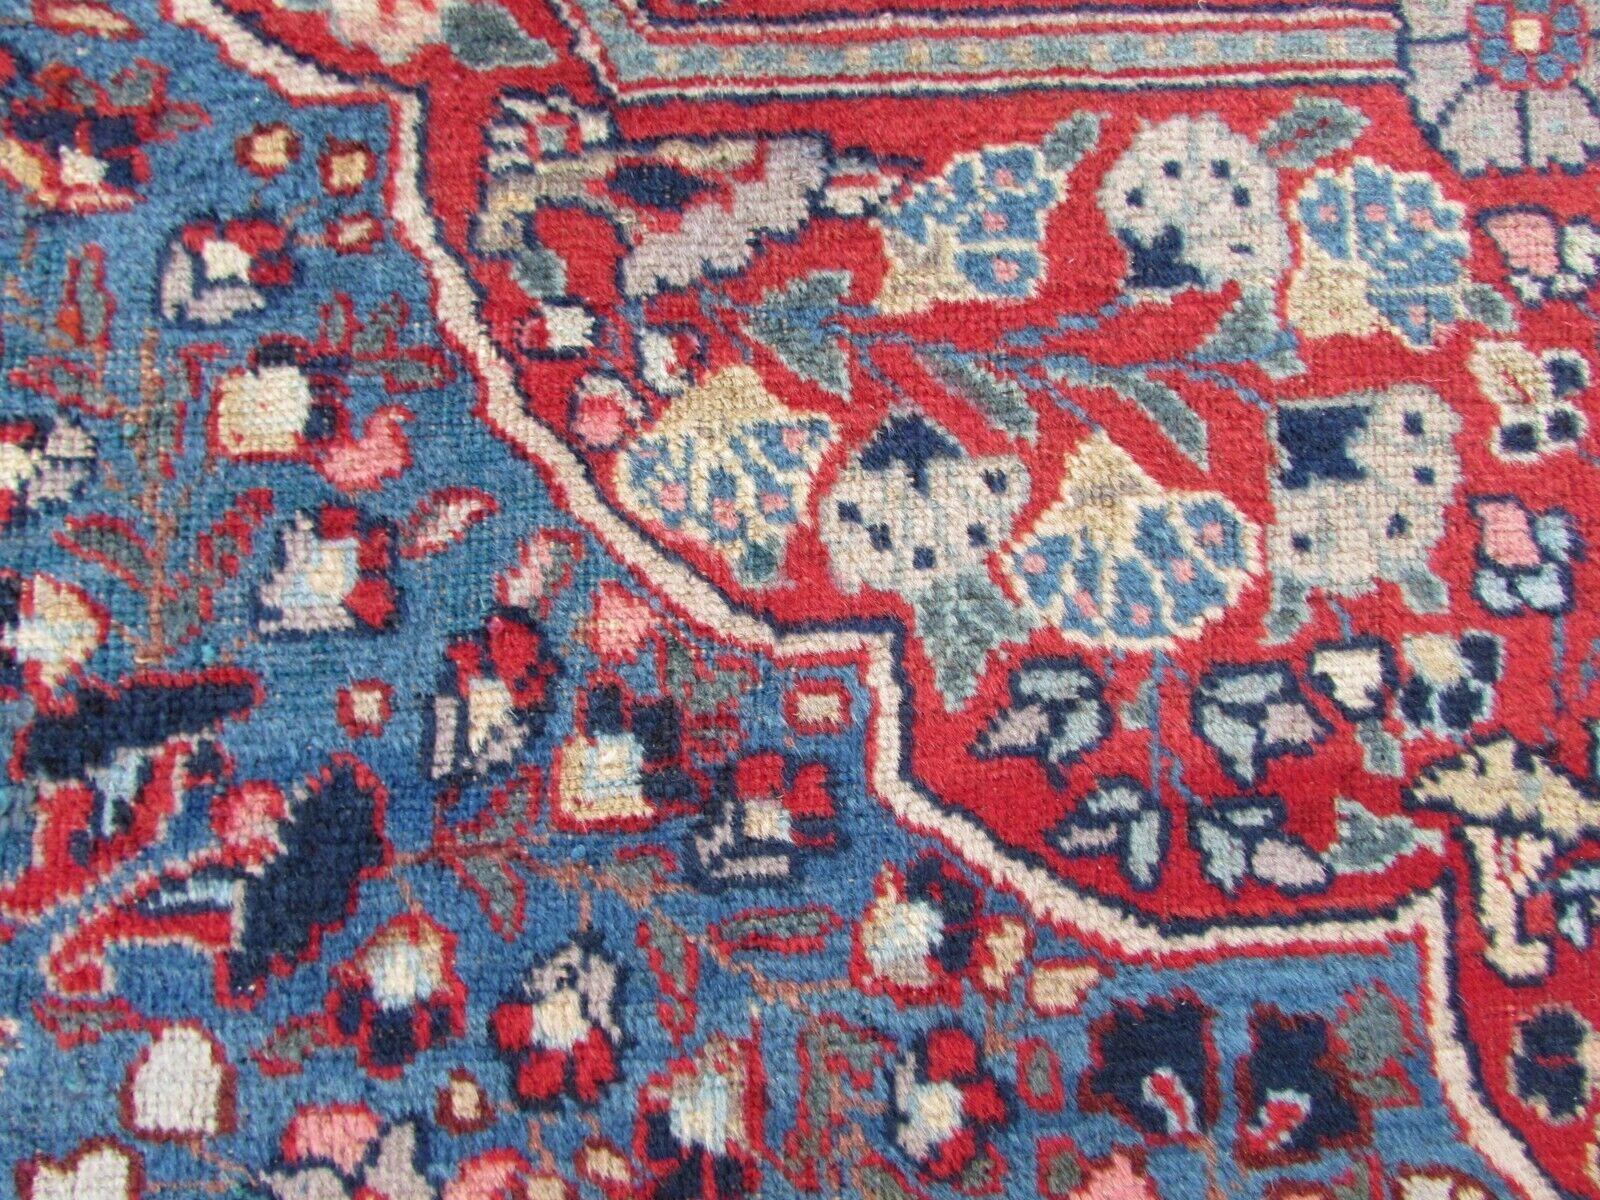 Hand-Knotted Handmade Vintage Persian Style Kazvin Rug 9.3' x 12.3', 1970s - 1Q68 For Sale